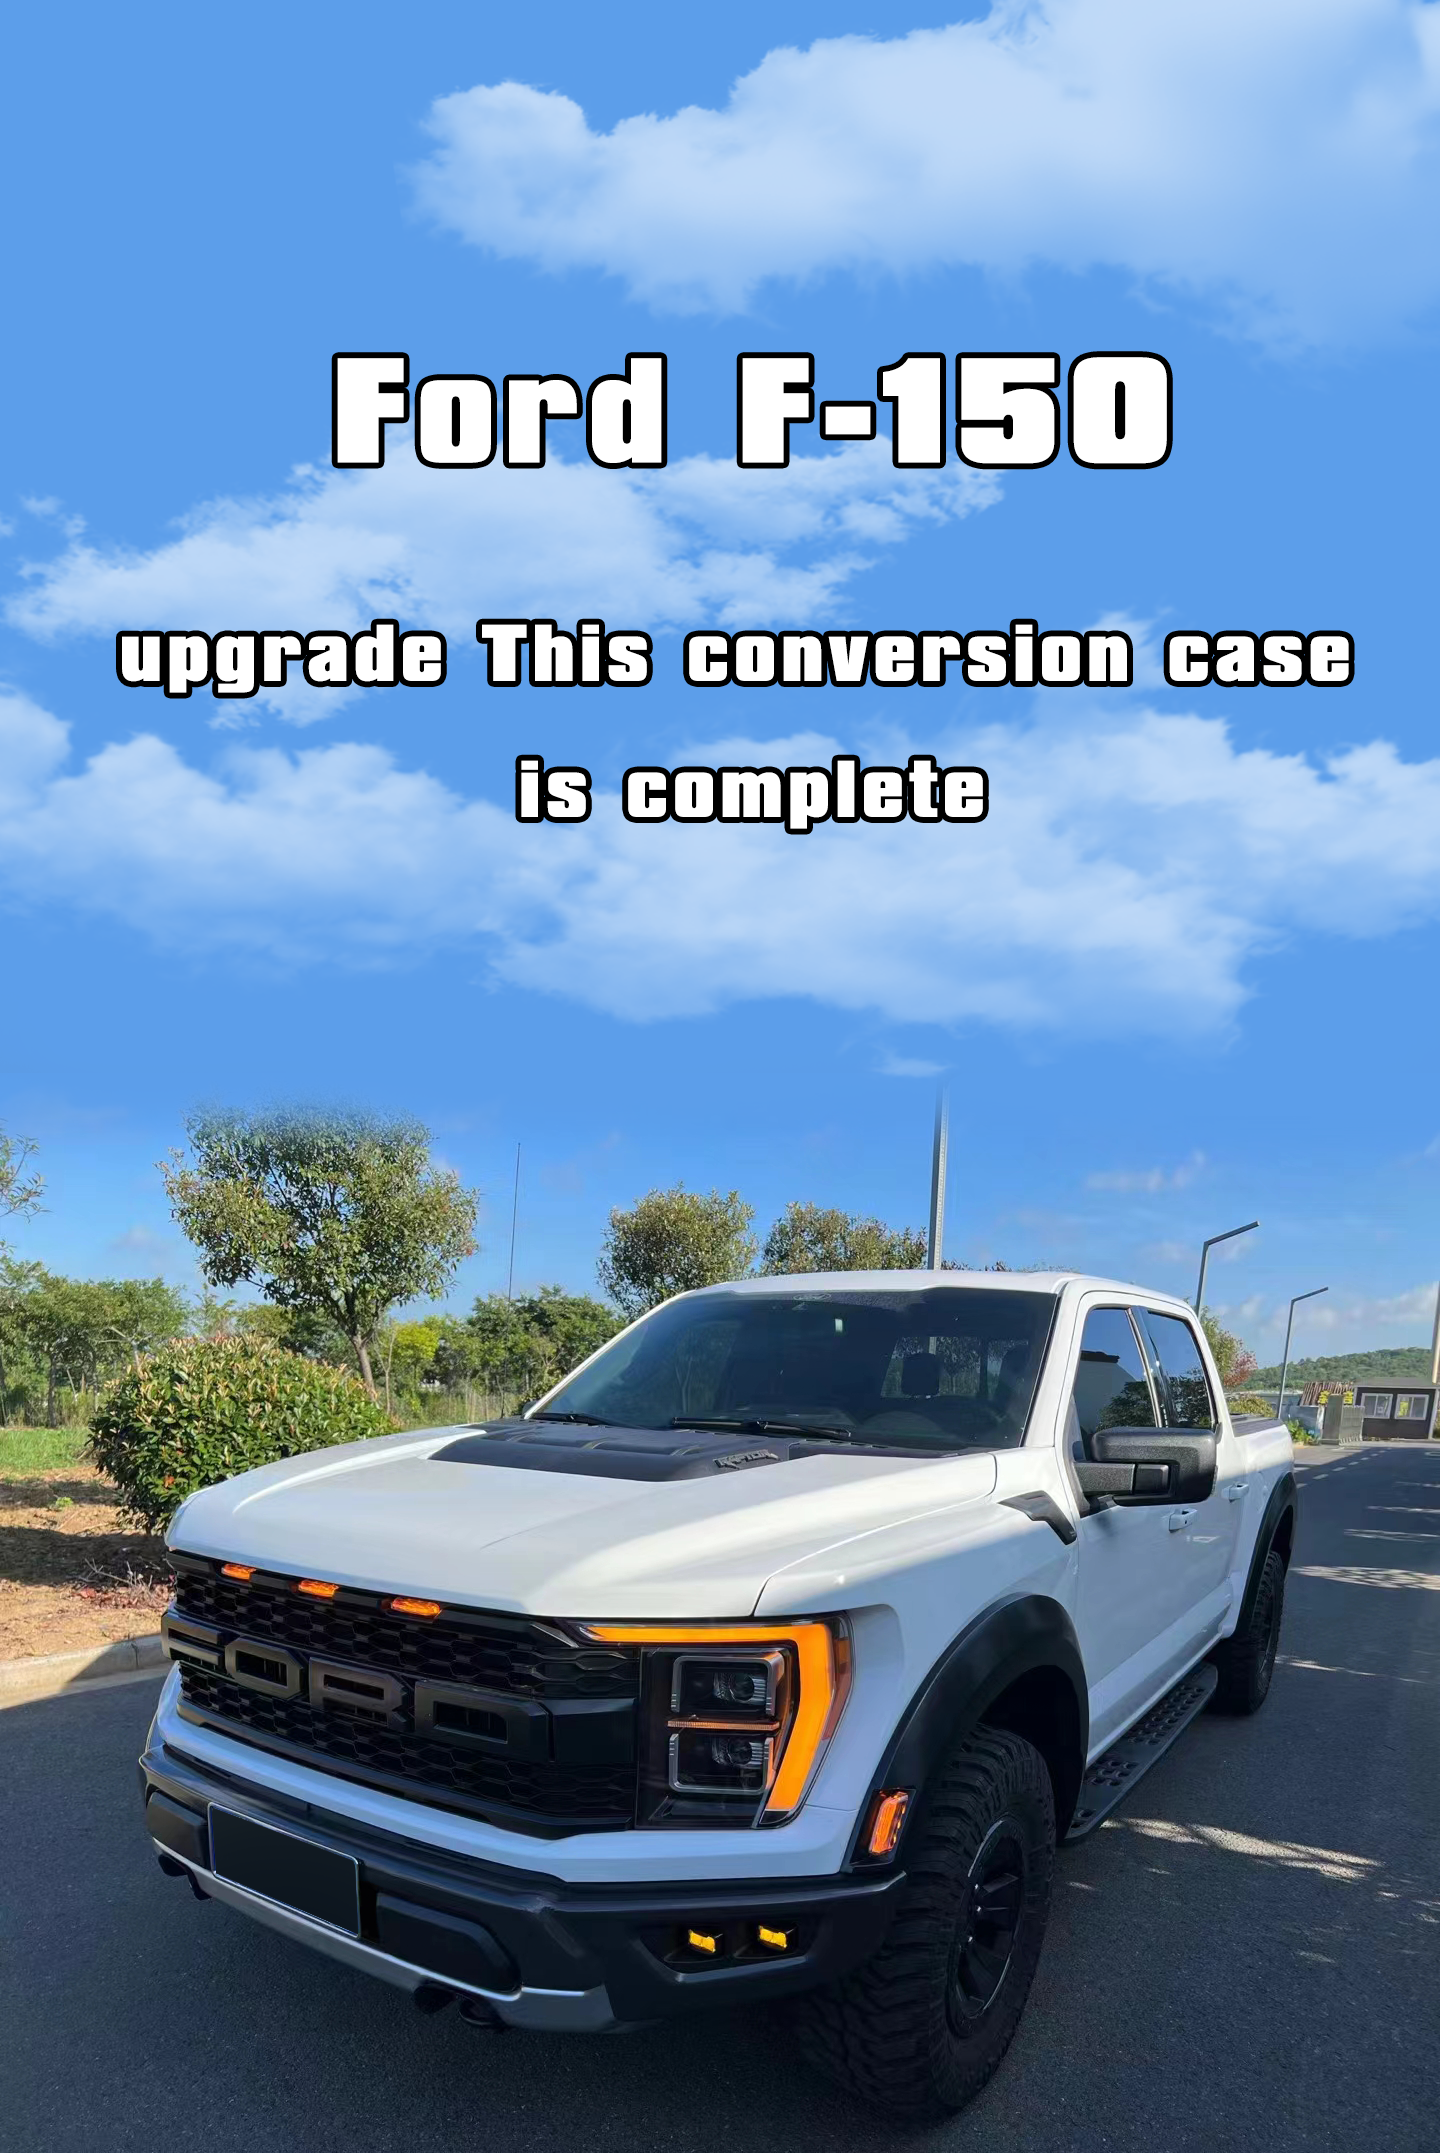 The new generation of unique F-150 Raptor is domineering, show a different style